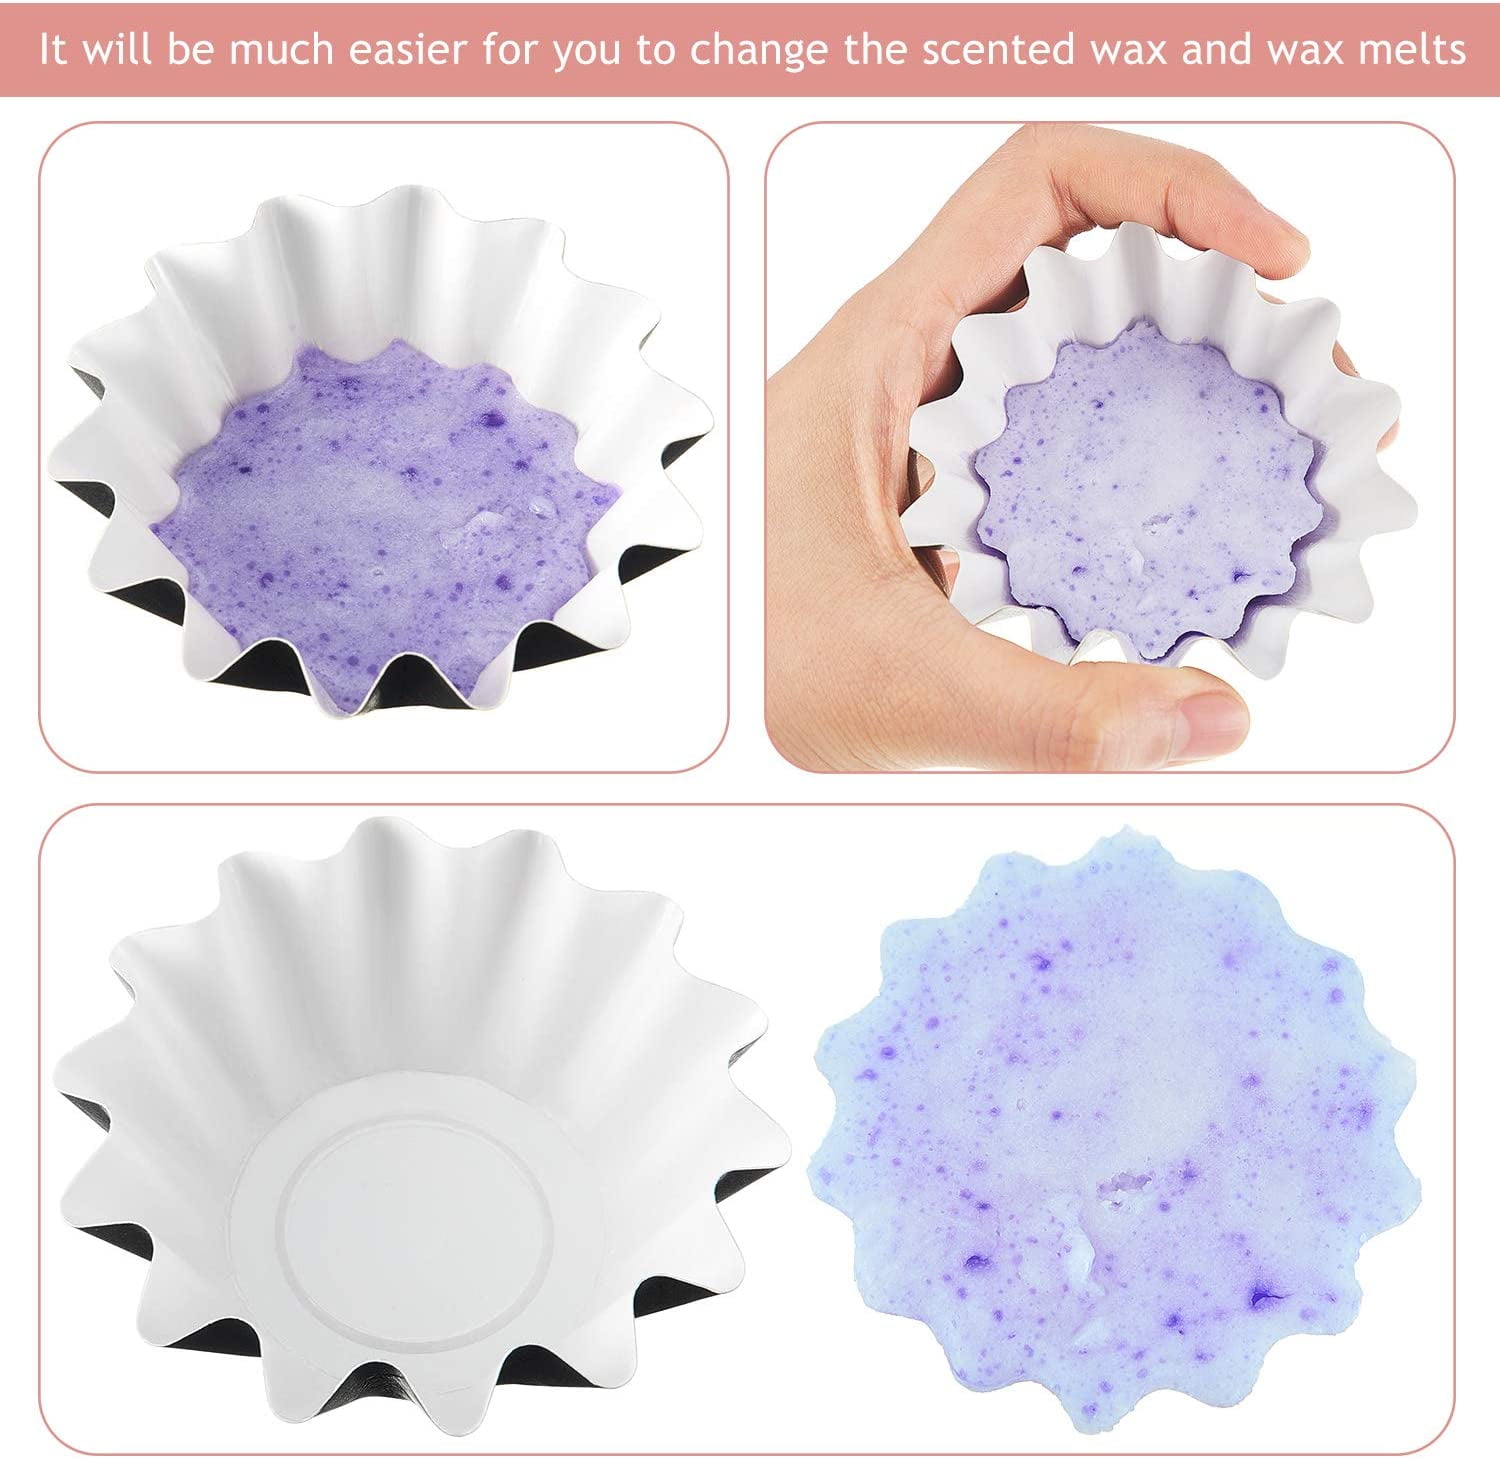 915 Generation Reusable Wax Melt Warmer Liners Wax Tray for Scented Wax